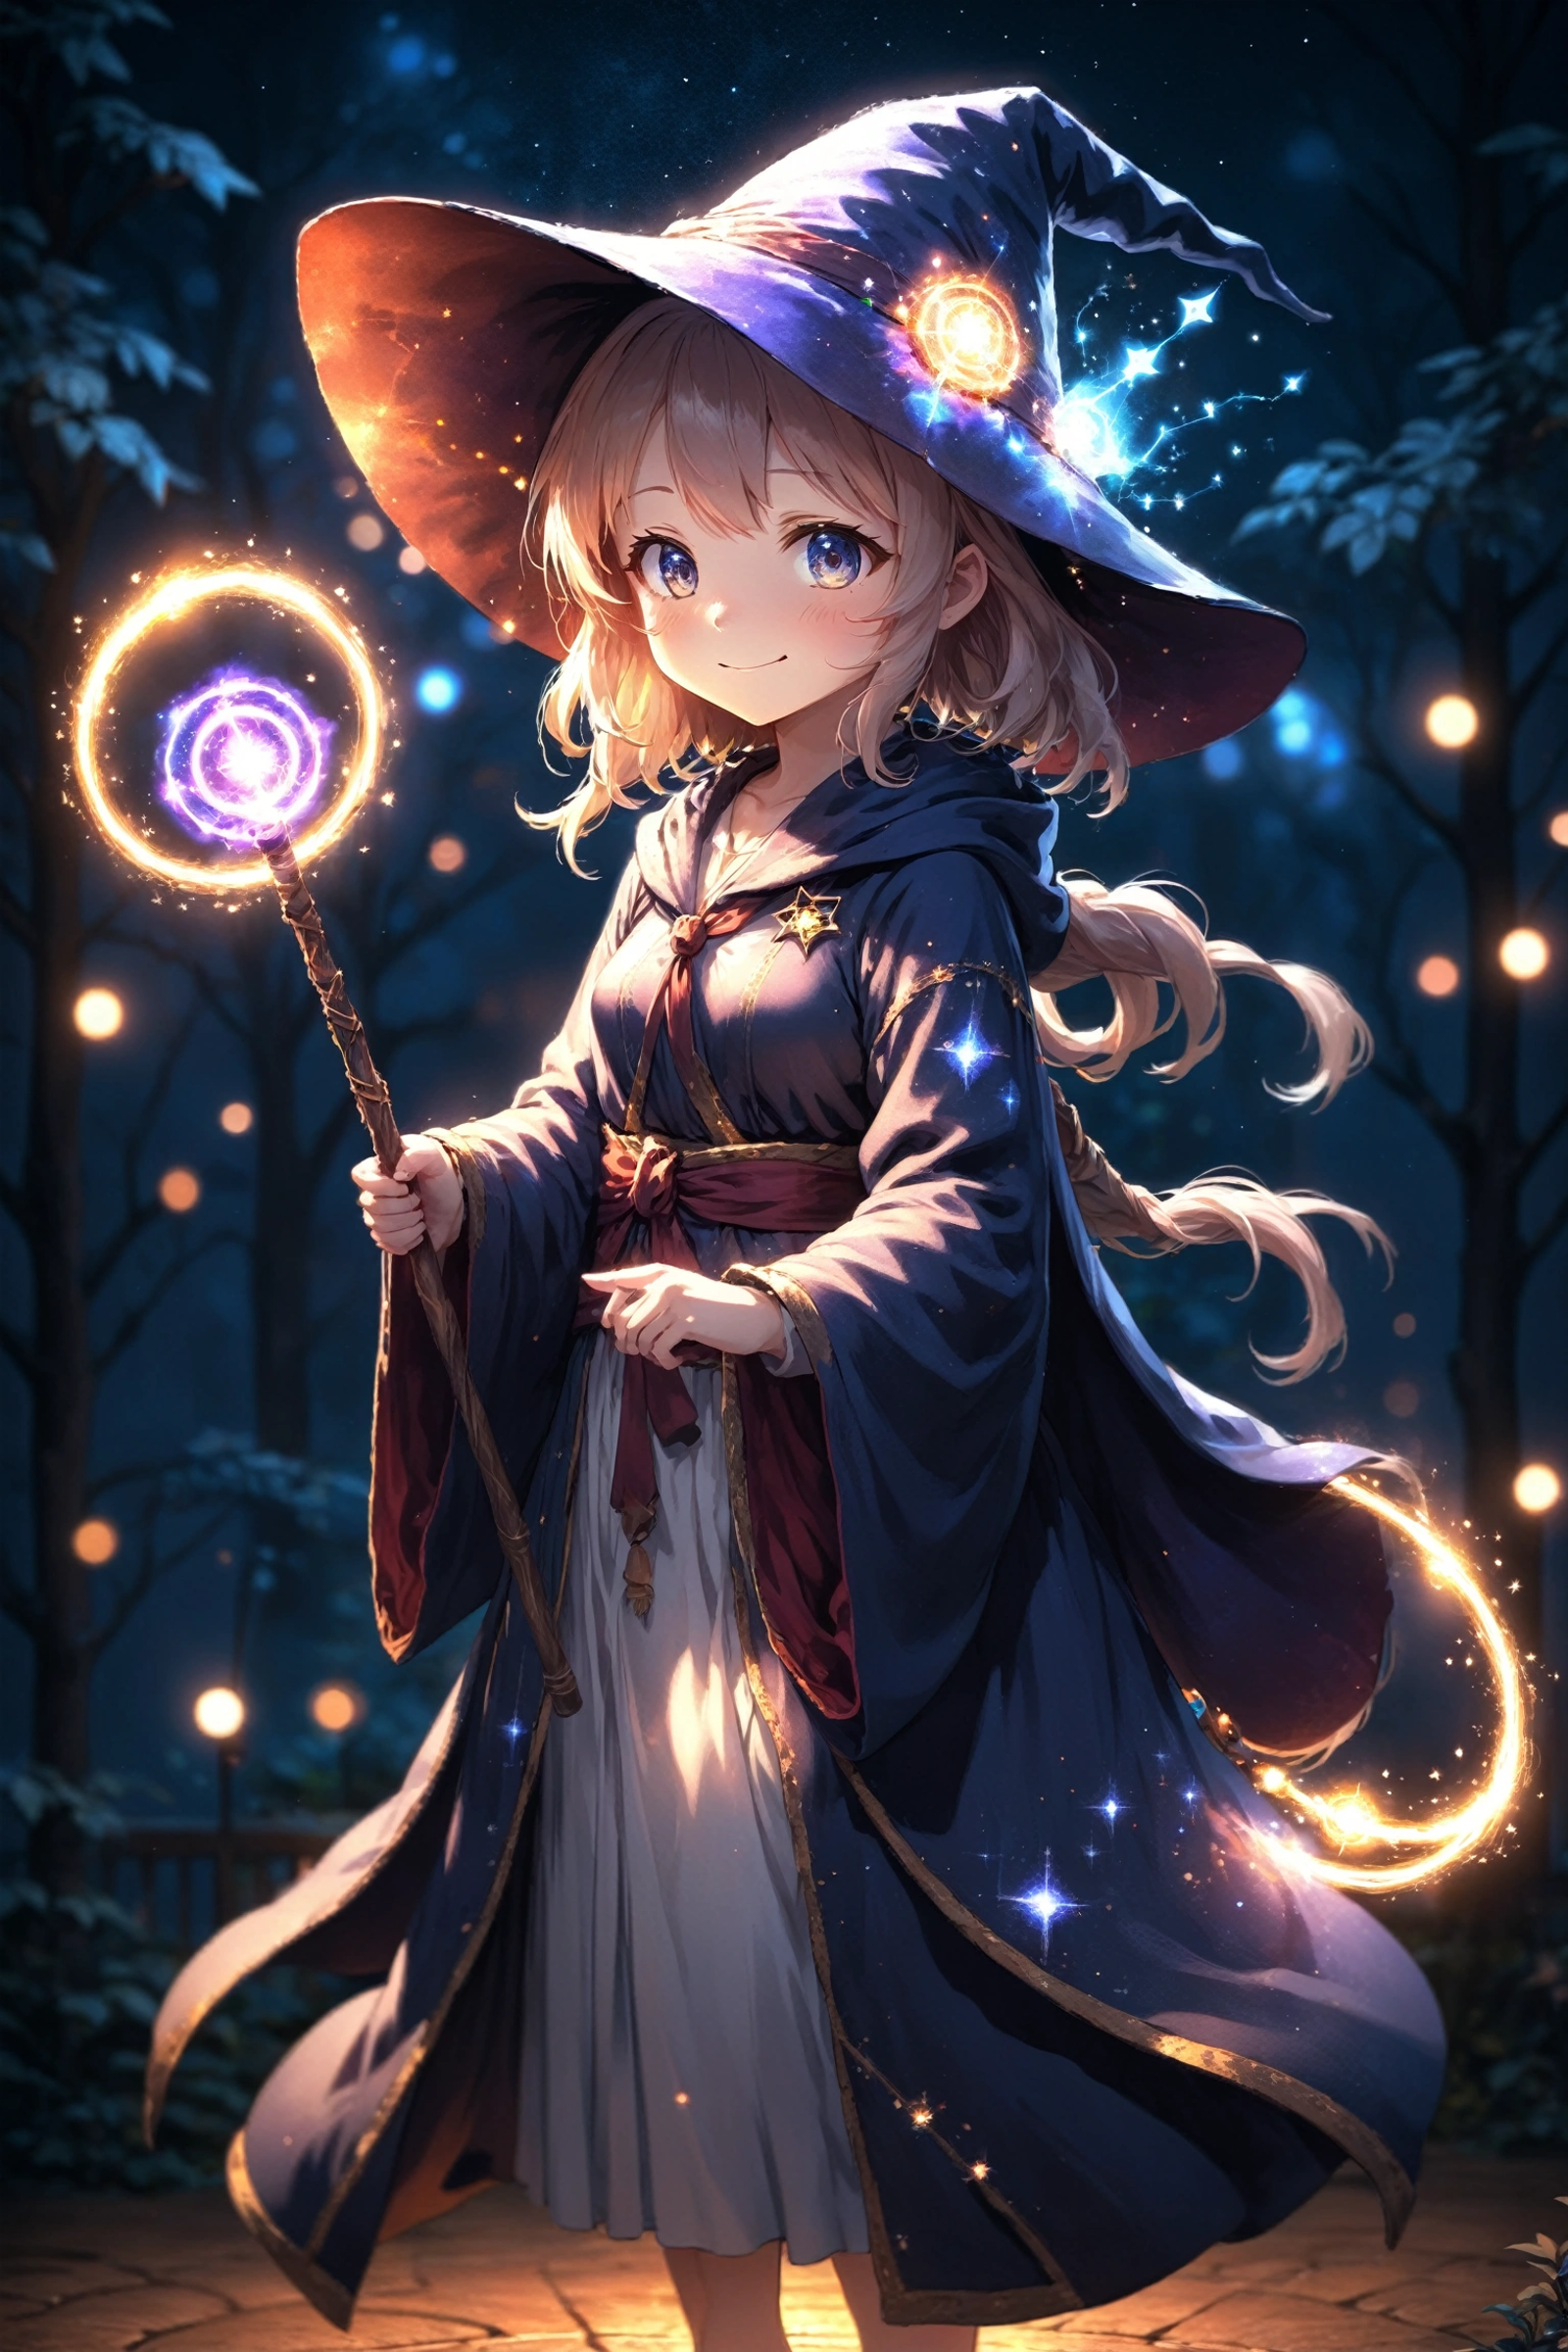 A girl in a witch's outfit with a wand and a broom.